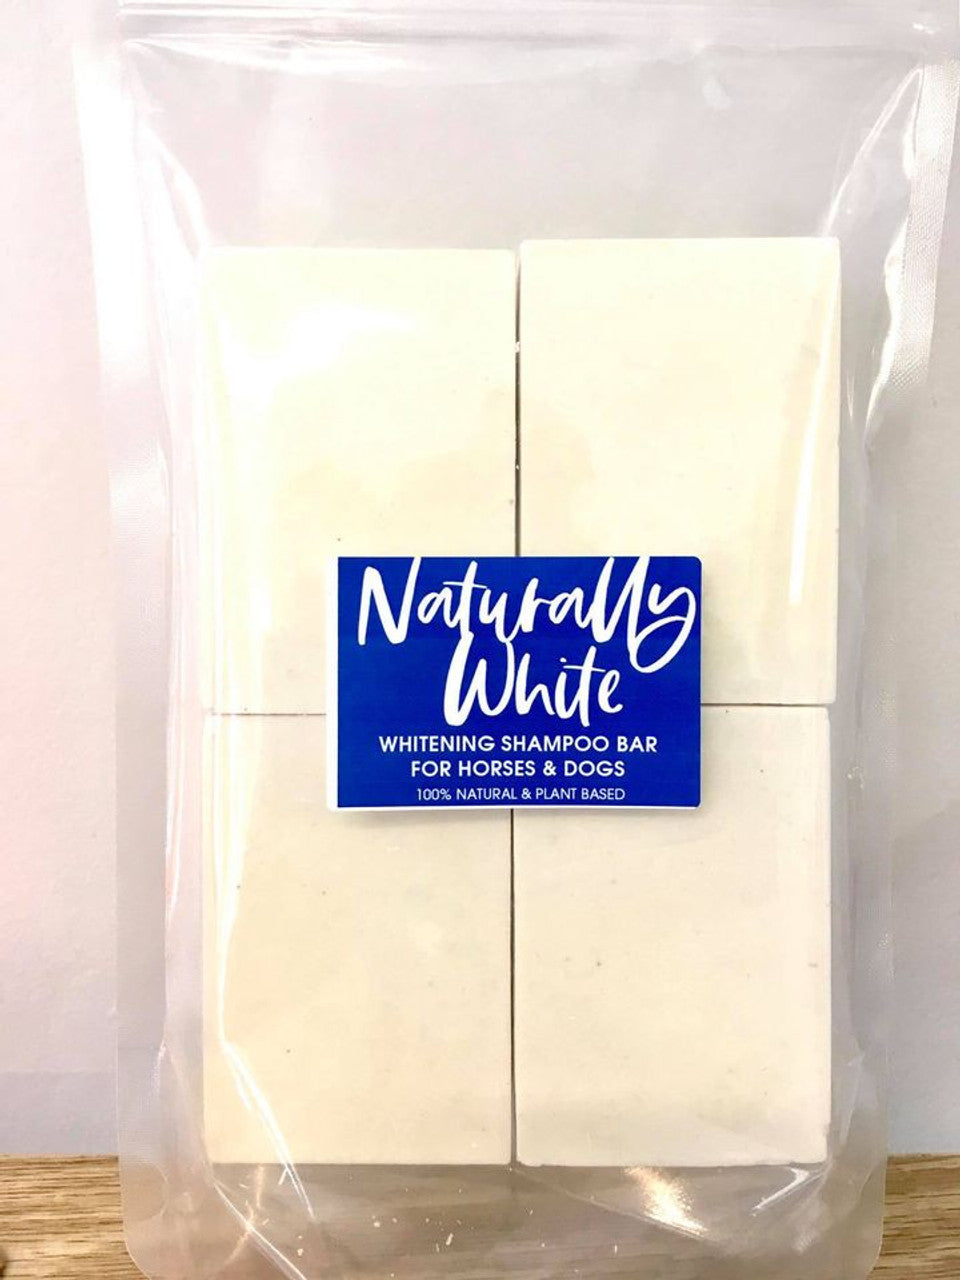 Naturally White Soap - Beekind NZ Product